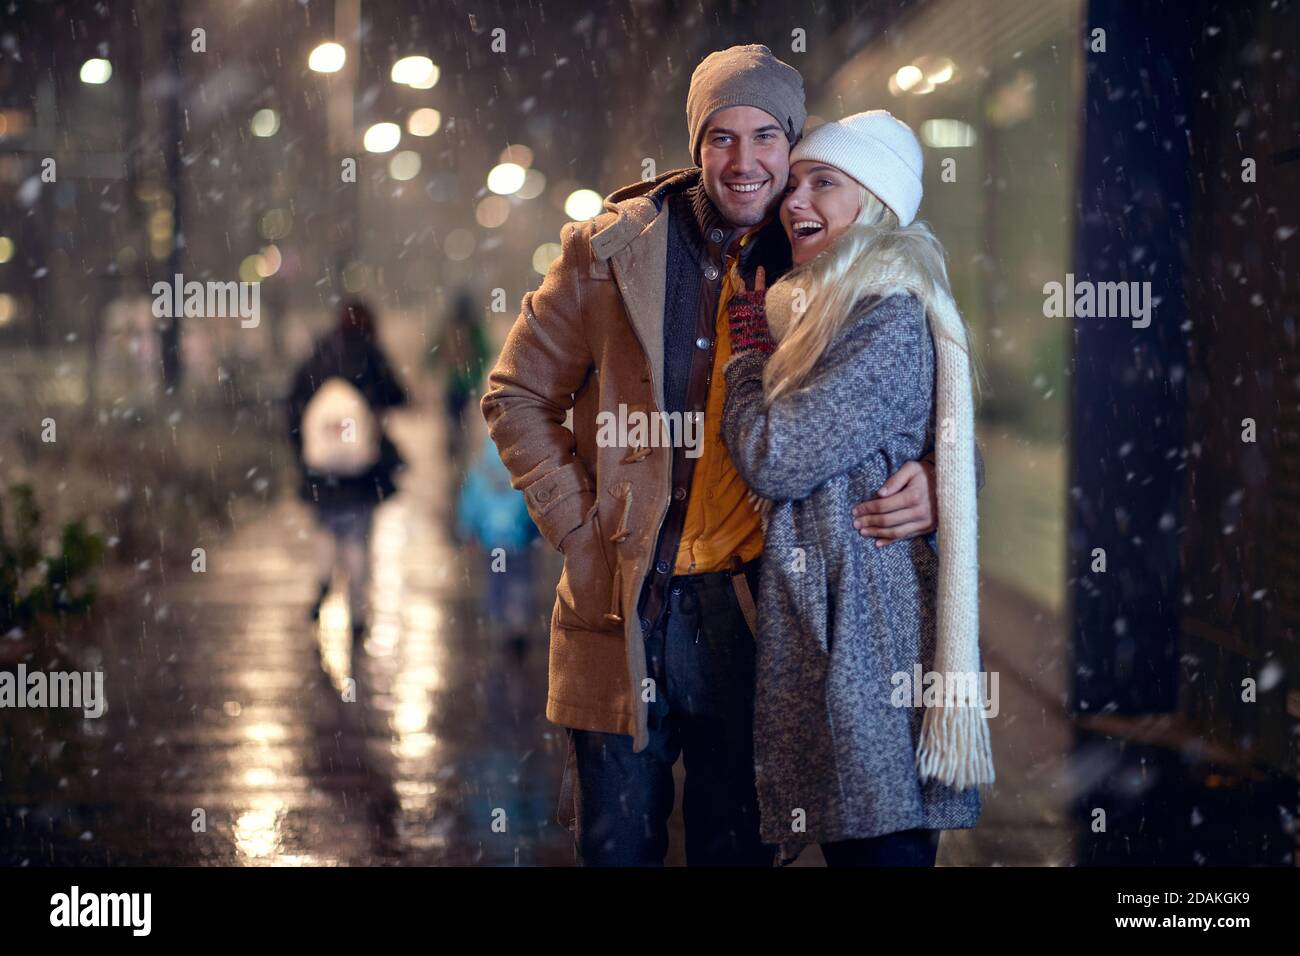 A young couple having good time together on a snowy weather in the city. Love, together, walk, snow, city Stock Photo